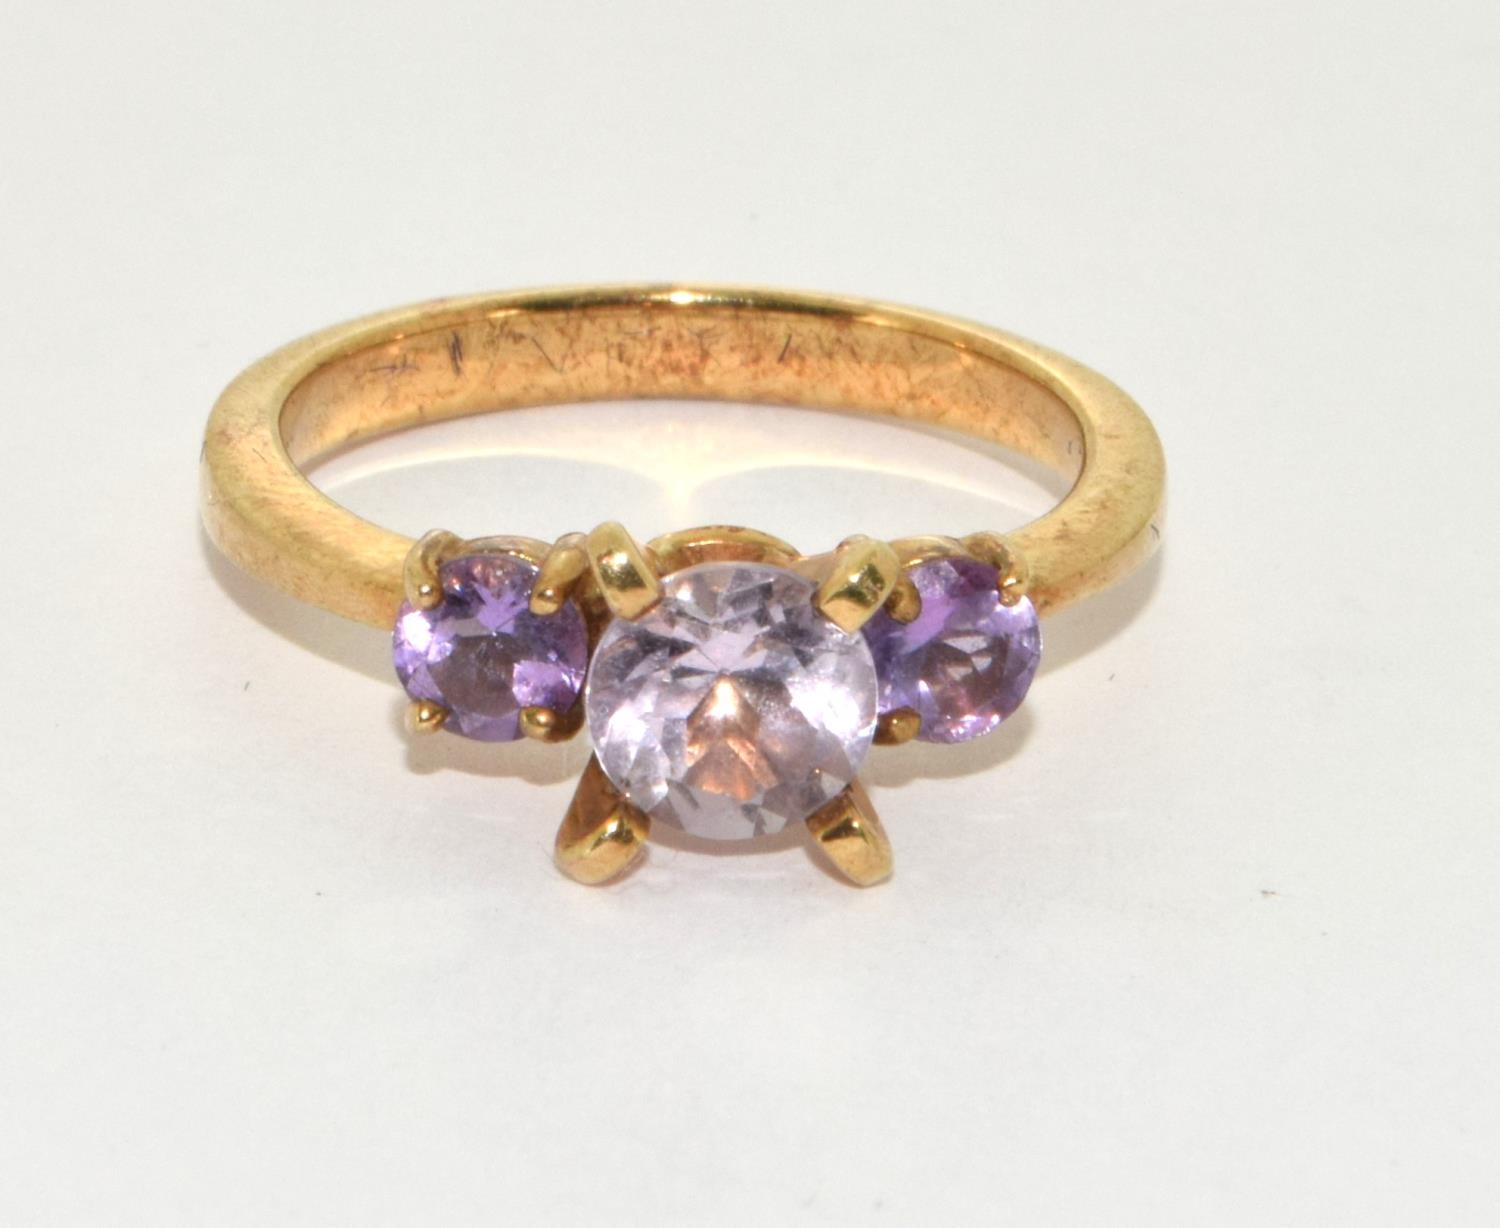 9ct gold ladies 3 stone Amethyst and tanzanite ring size N - Image 5 of 5